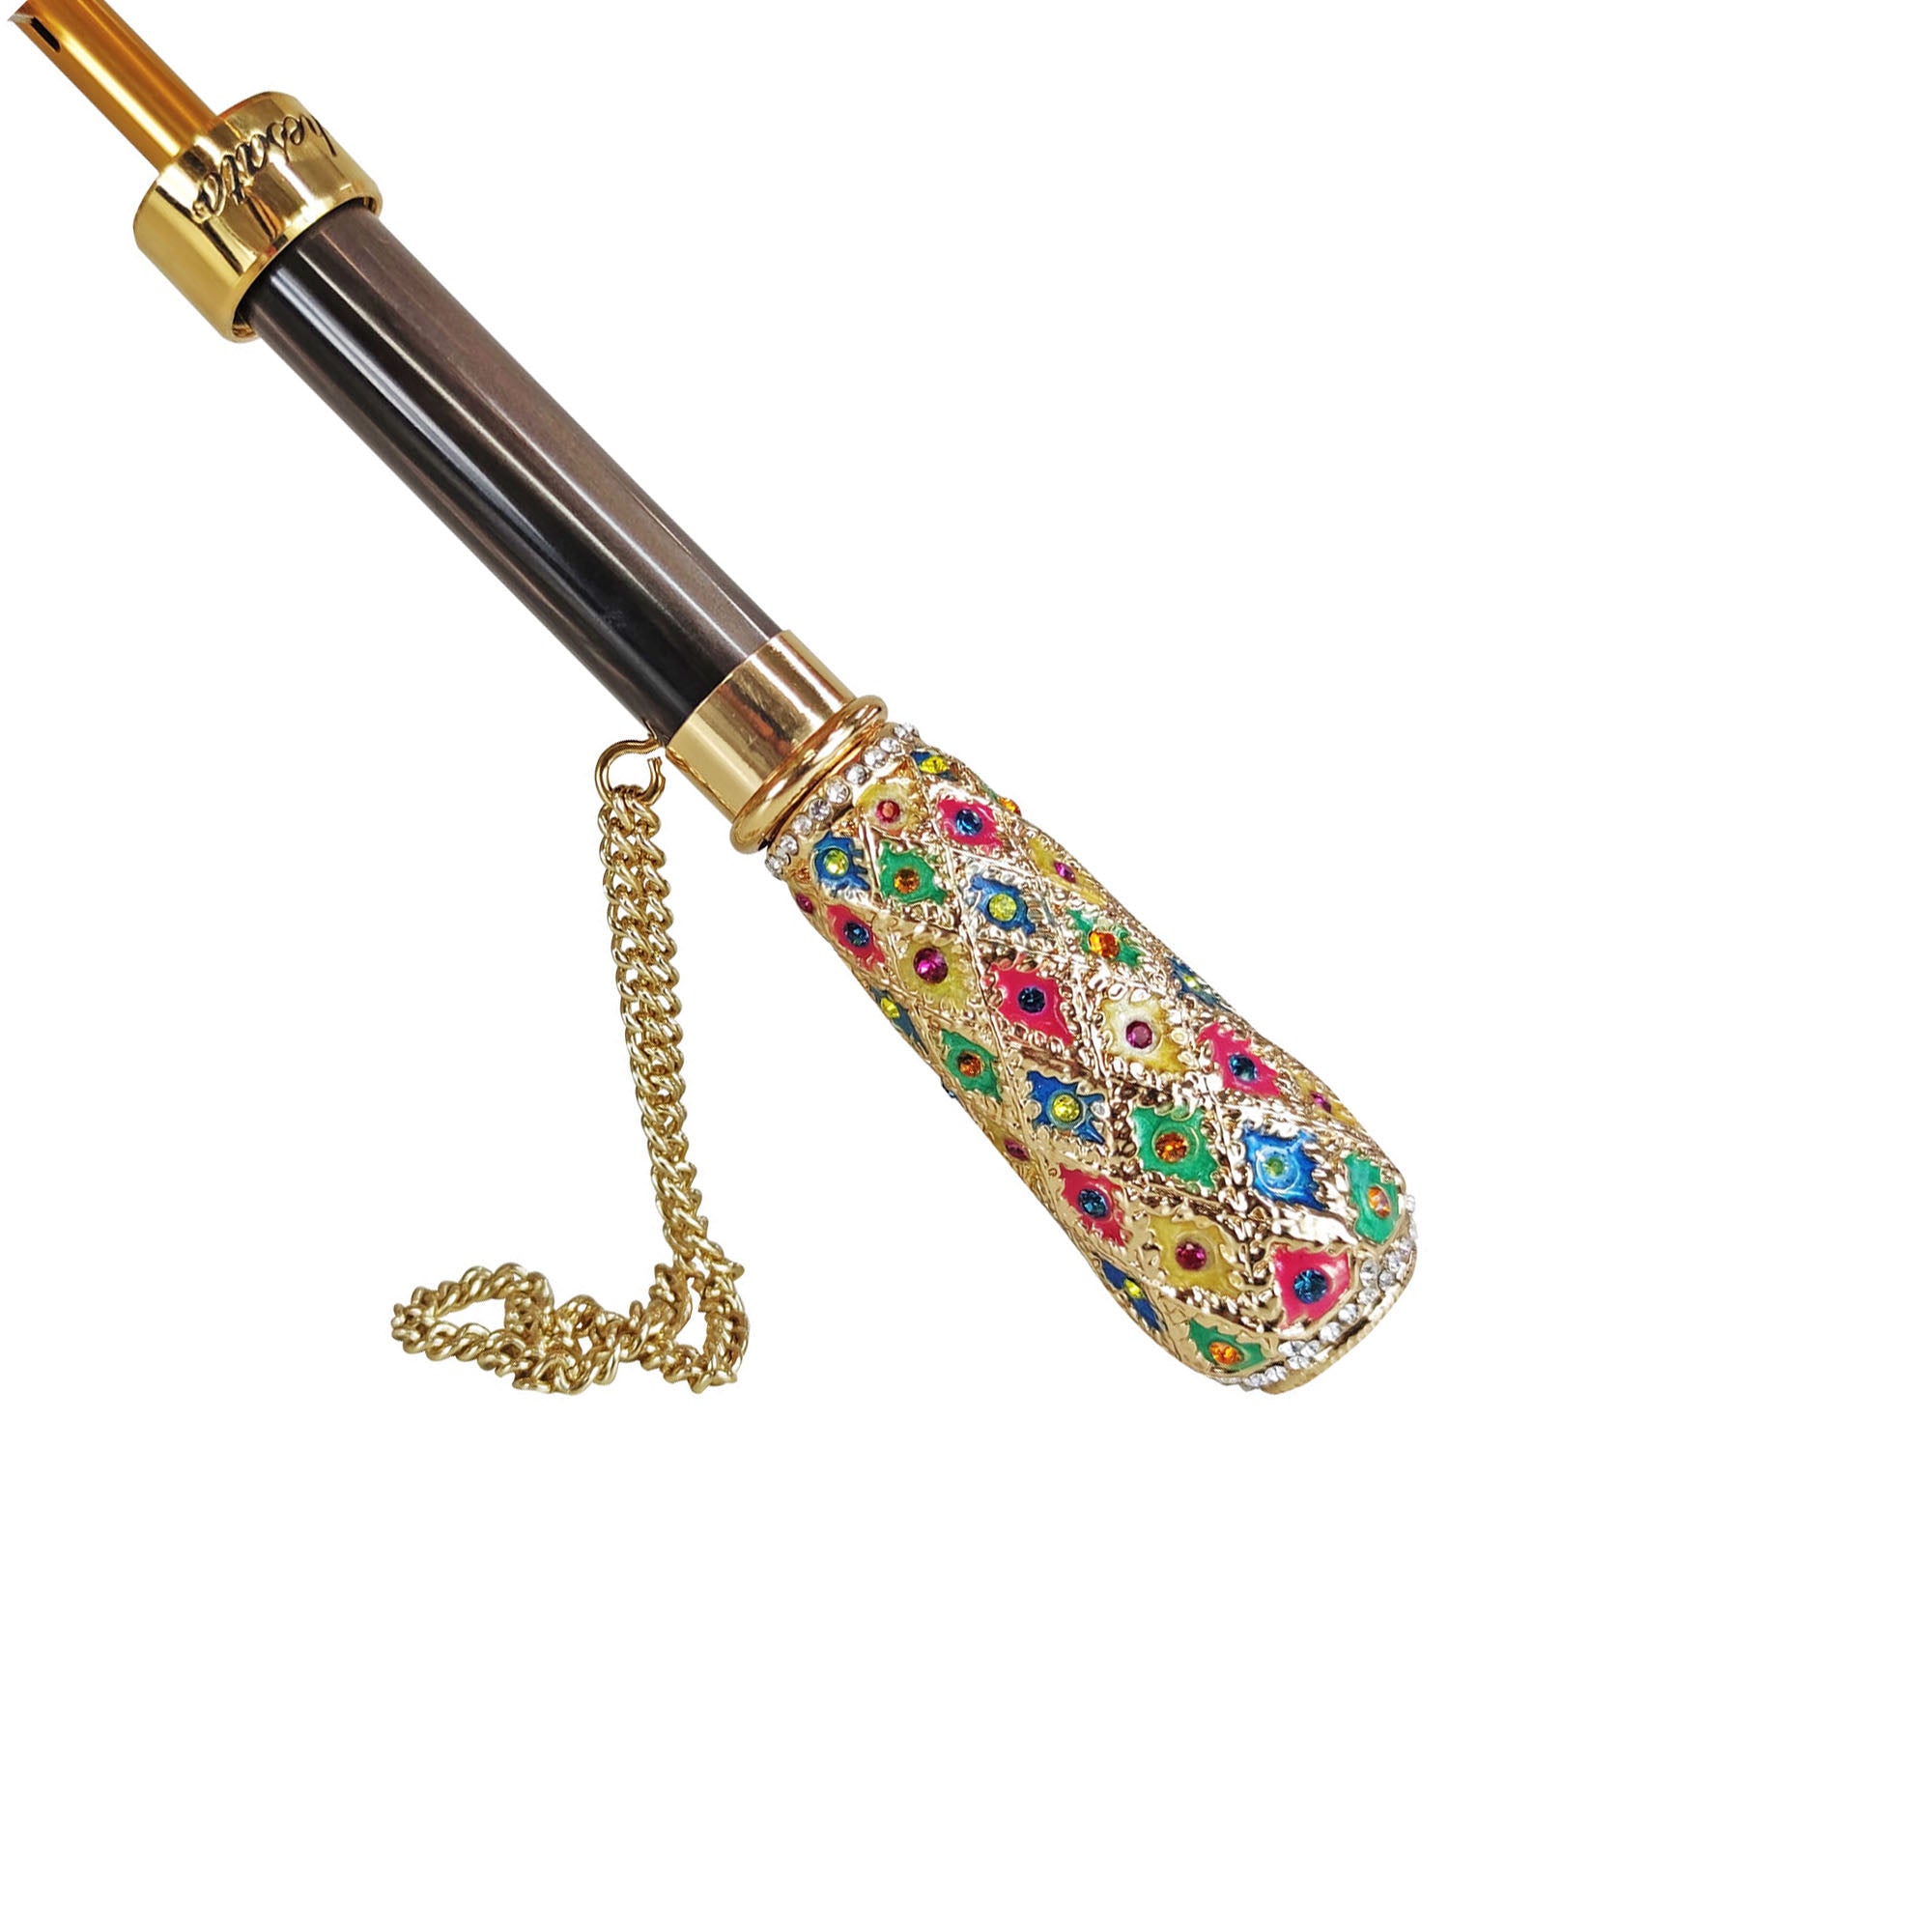 Exclusive Italian collection with hand painted handle